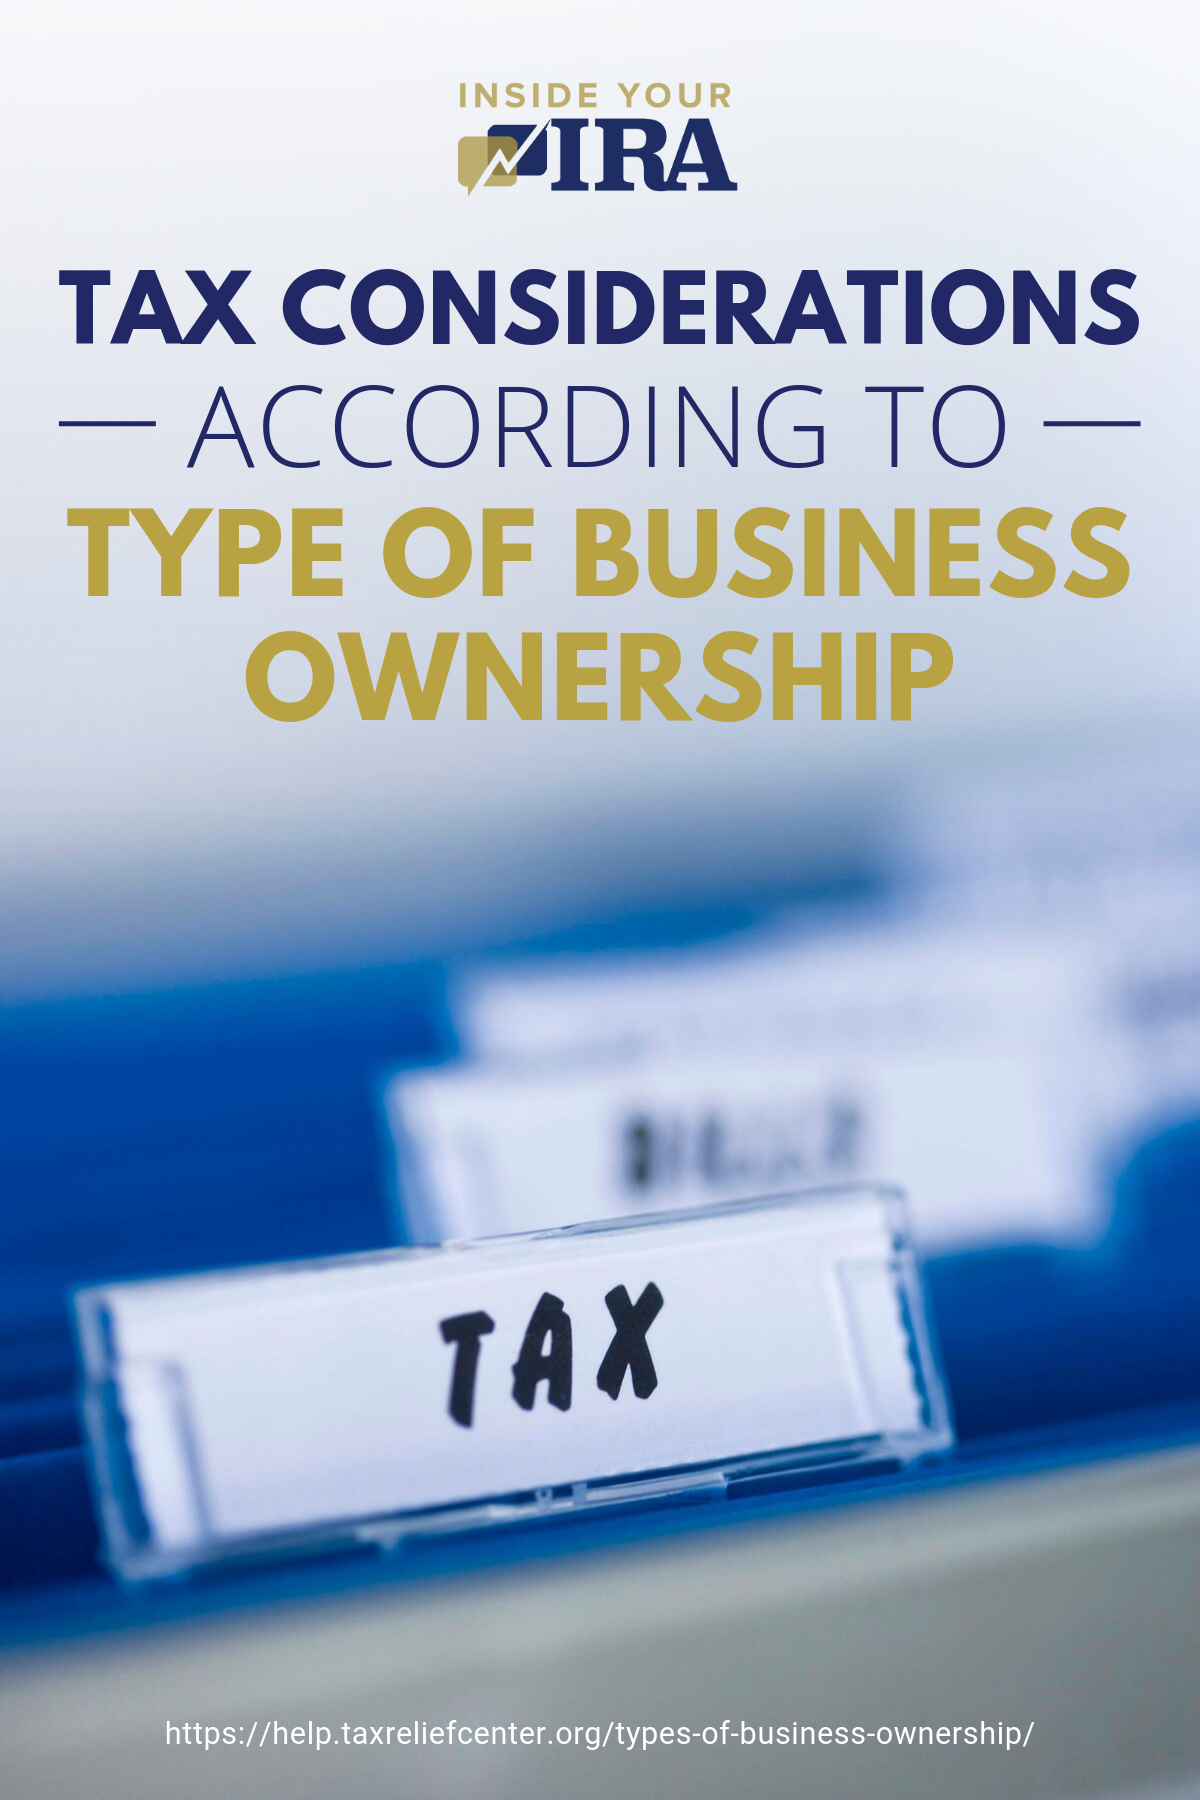 Tax Considerations According To Type Of Business Ownership https://help.taxreliefcenter.org/types-of-business-ownership/